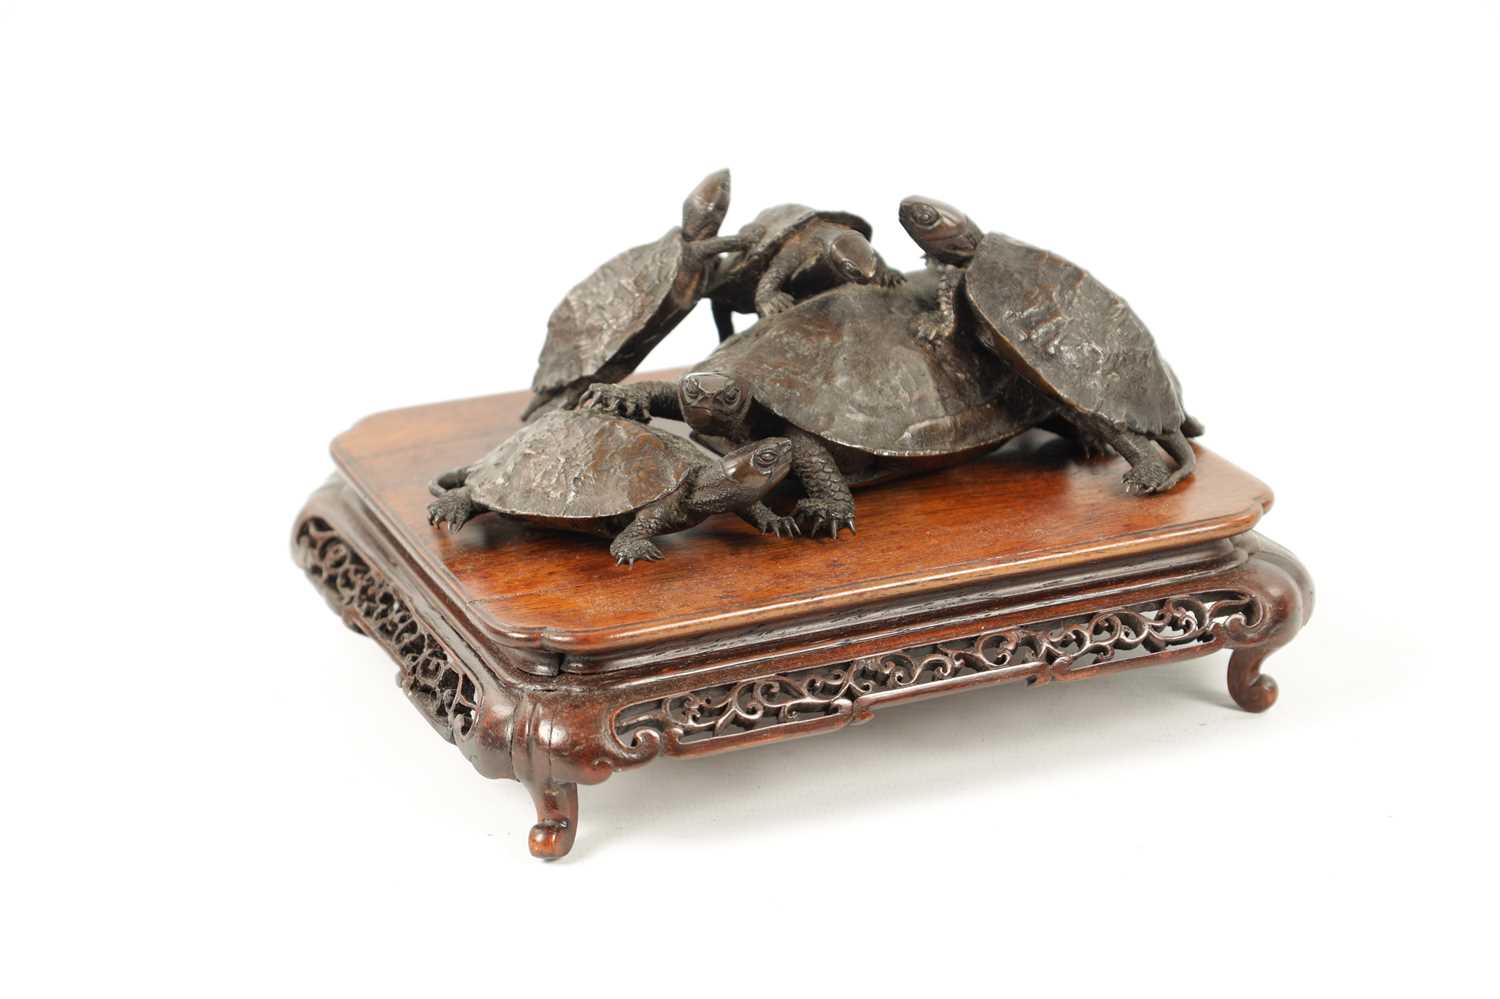 A FINE JAPANESE MEIJI PERIOD BRONZE SCULPTURE OF A GROUP OF TURTLES - Image 3 of 8